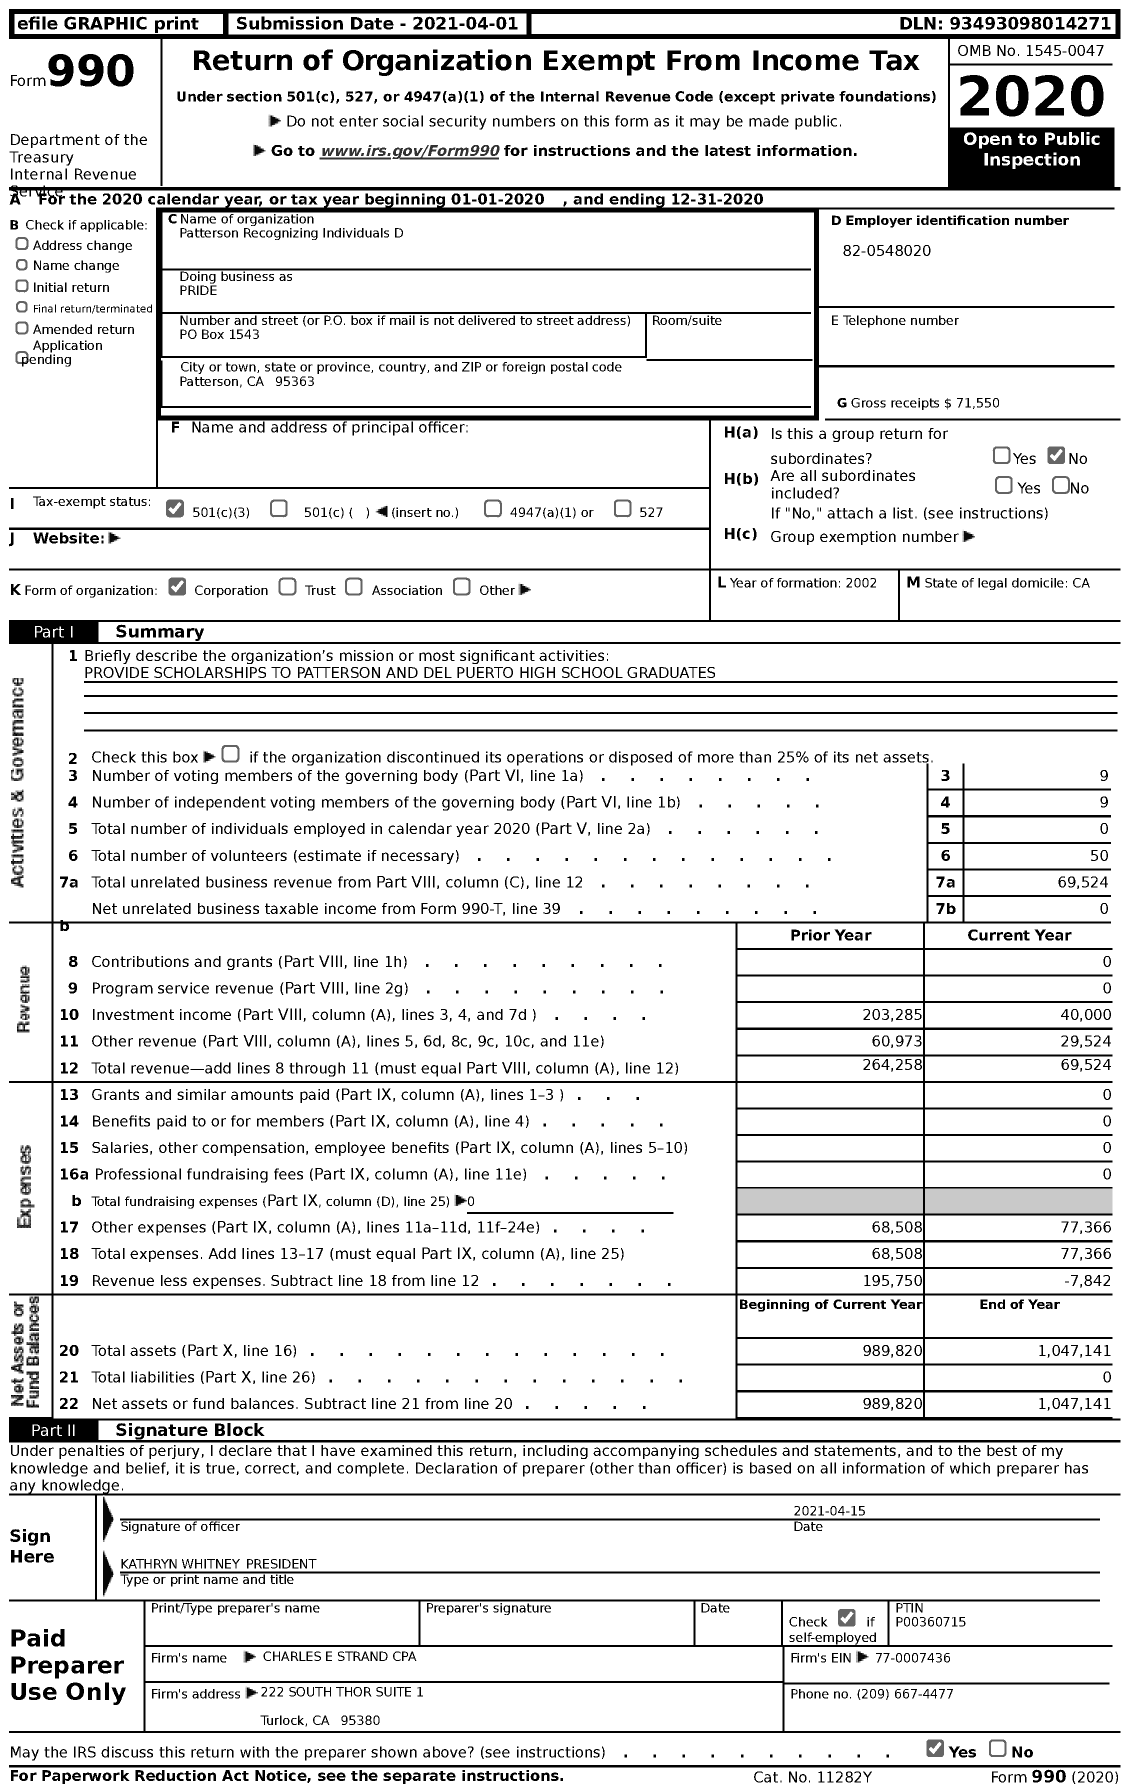 Image of first page of 2020 Form 990 for Patterson Recognizing Individuals D (PRIDE)